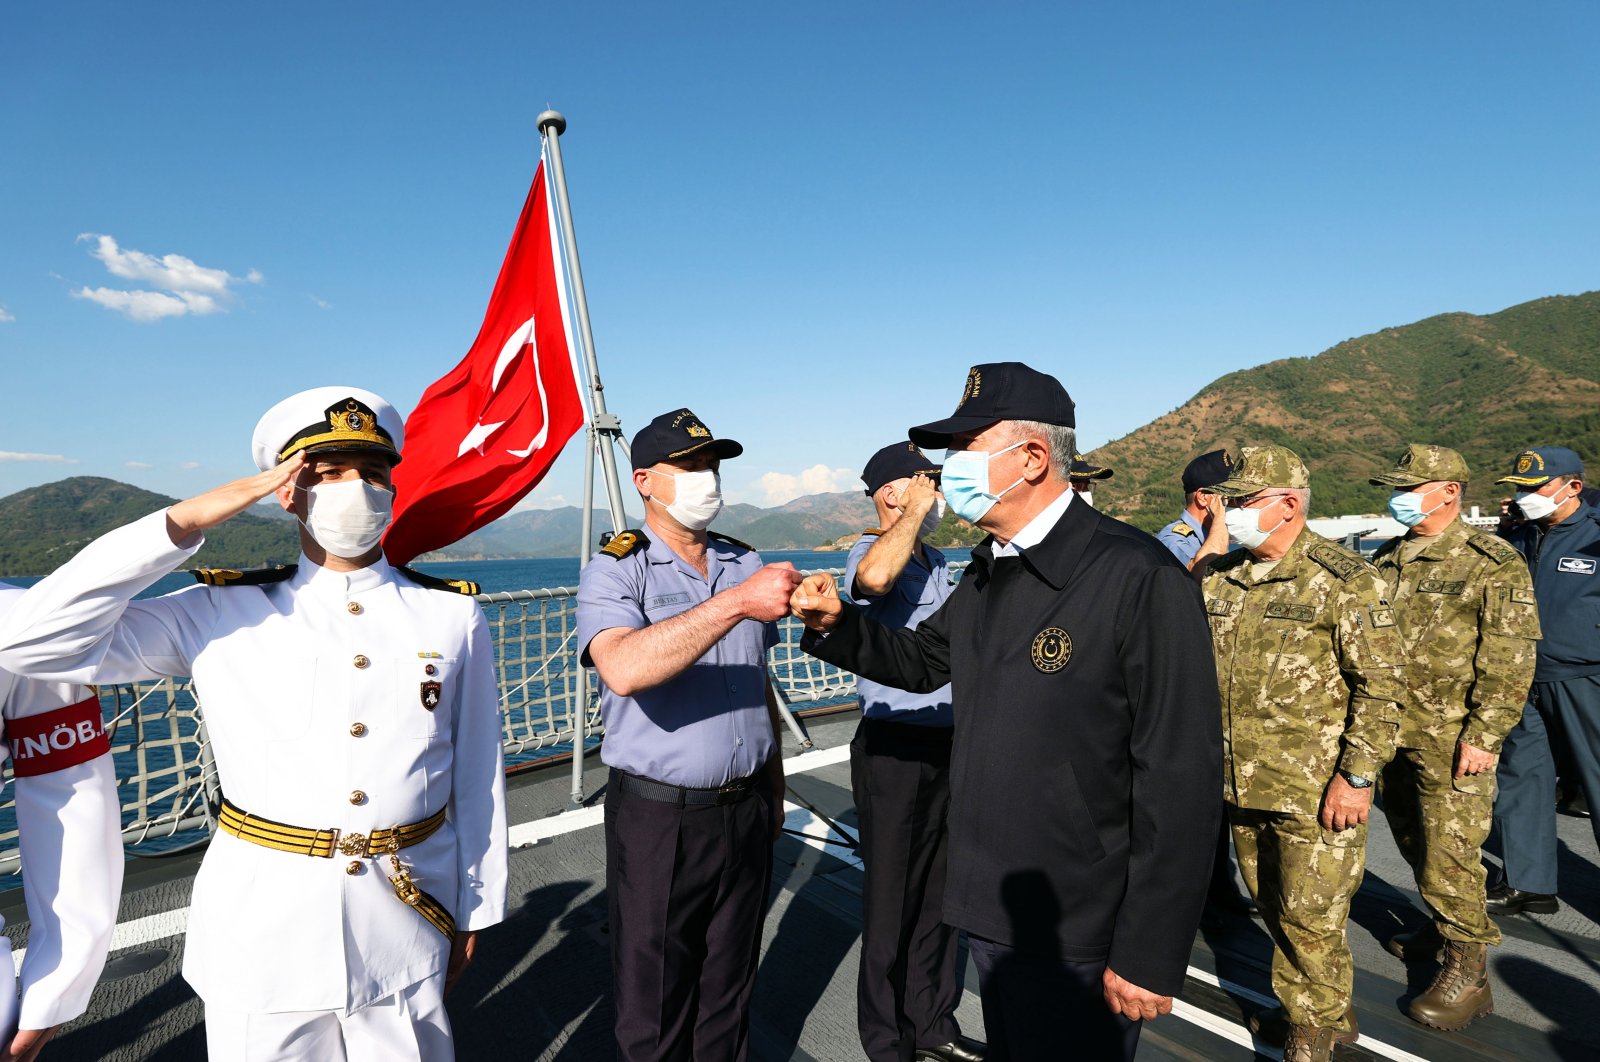 Defense Minister Hulusi Akar (C) stands among a group of international military personnel during the Sea Wolf (Deniz Kurdu) military exercise off Marmaris, Muğla province, Turkey, June 4, 2021. (AA Photo)